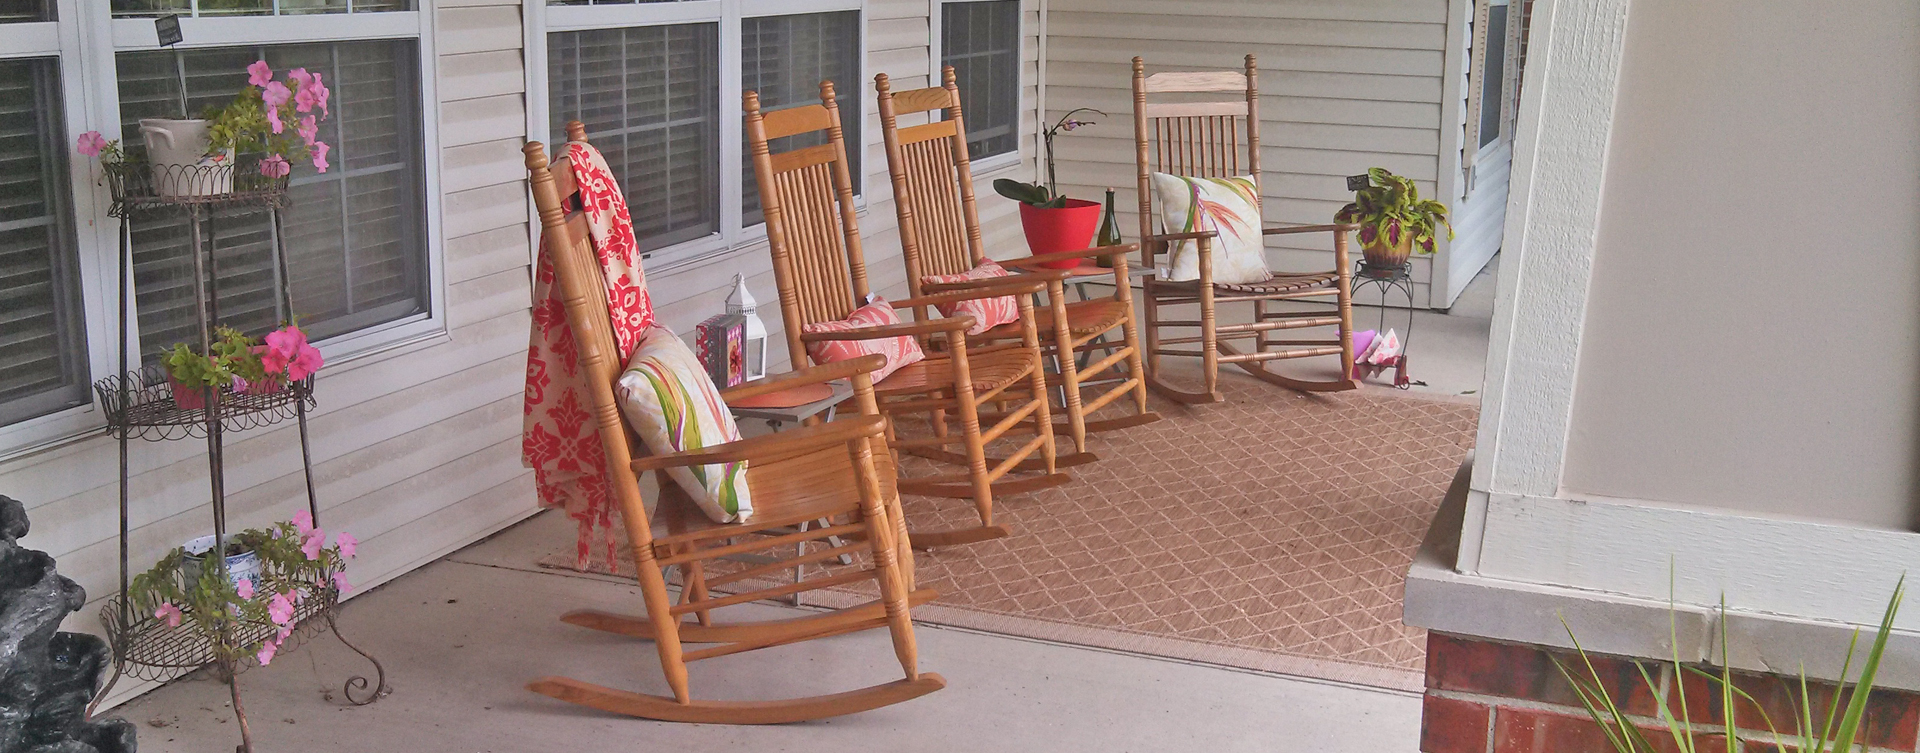 Relax in your favorite chair on the porch at Bickford of Fort Dodge